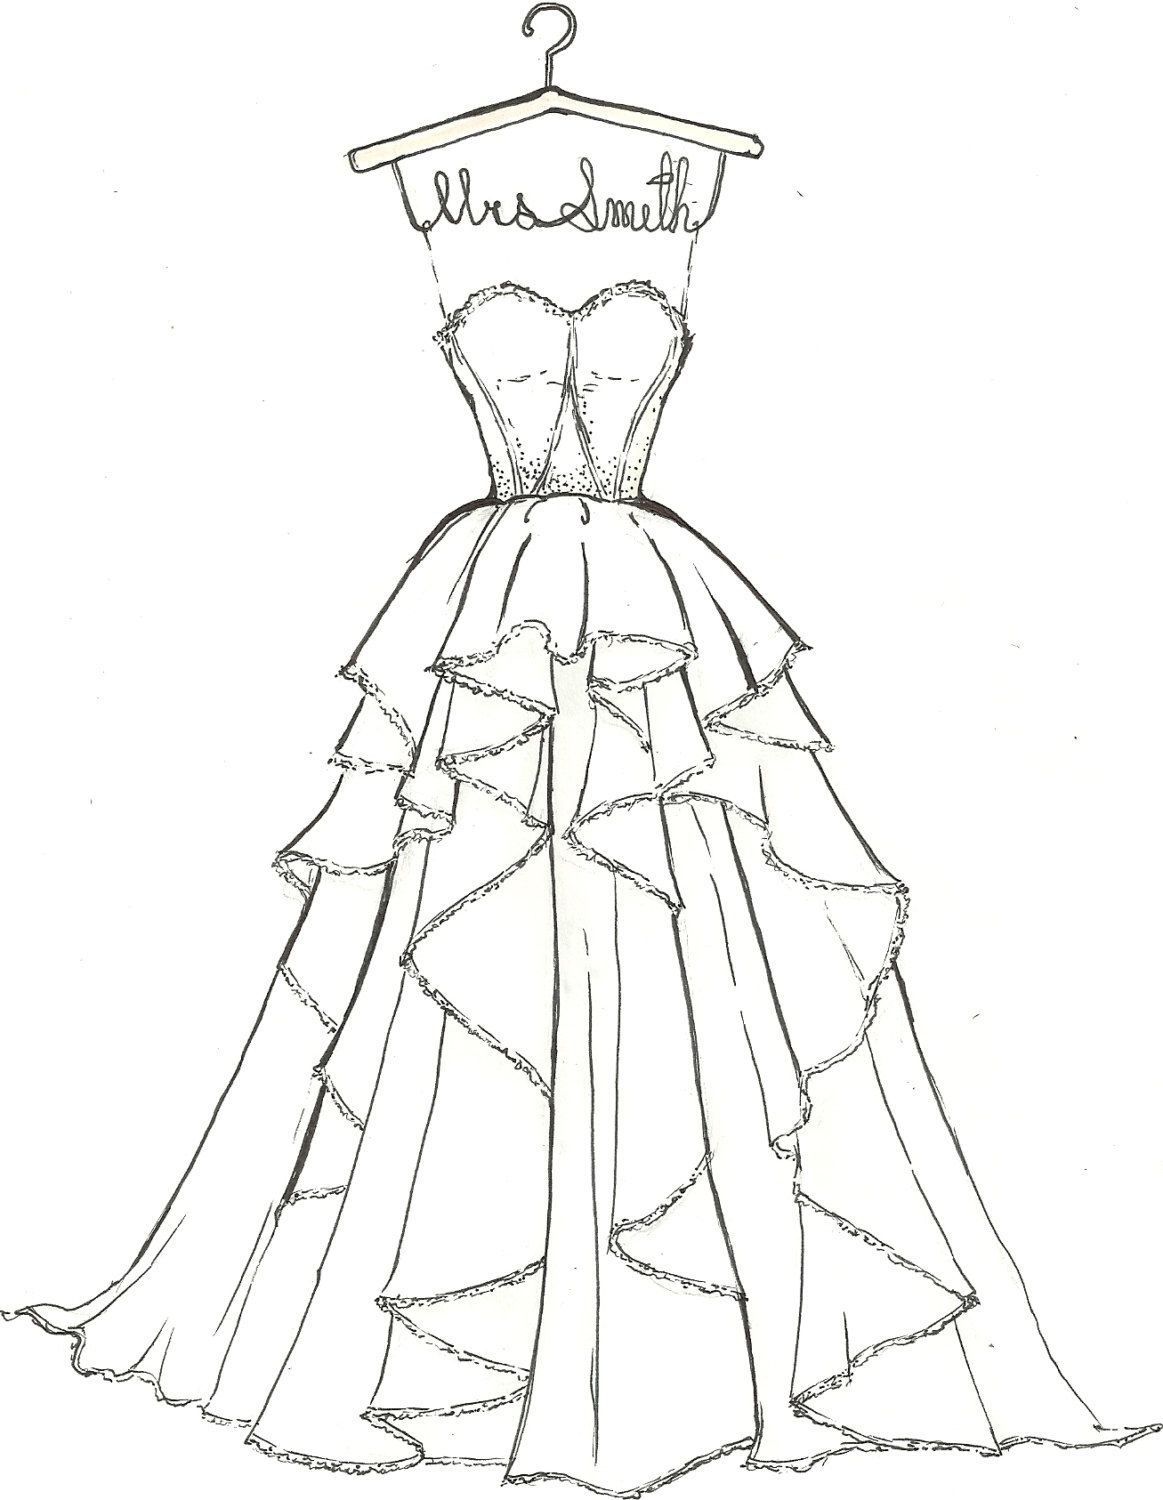 Free Wedding Dress Coloring Pages, Download Free Wedding Dress ...